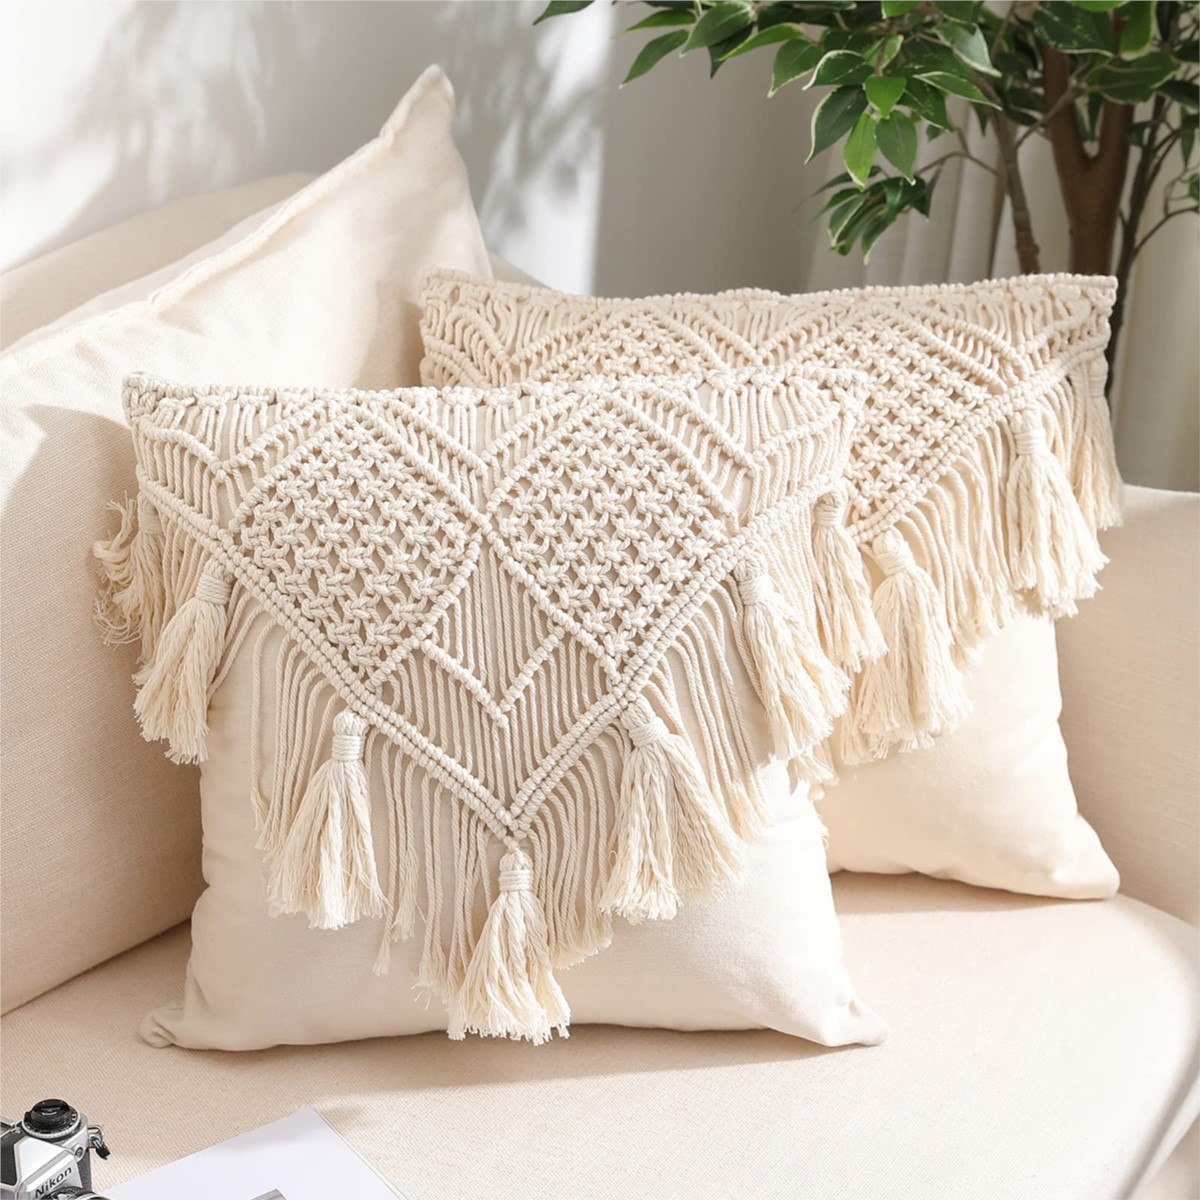 The Art of Pillow Styling: Transforming Your Home with Pillow Covers